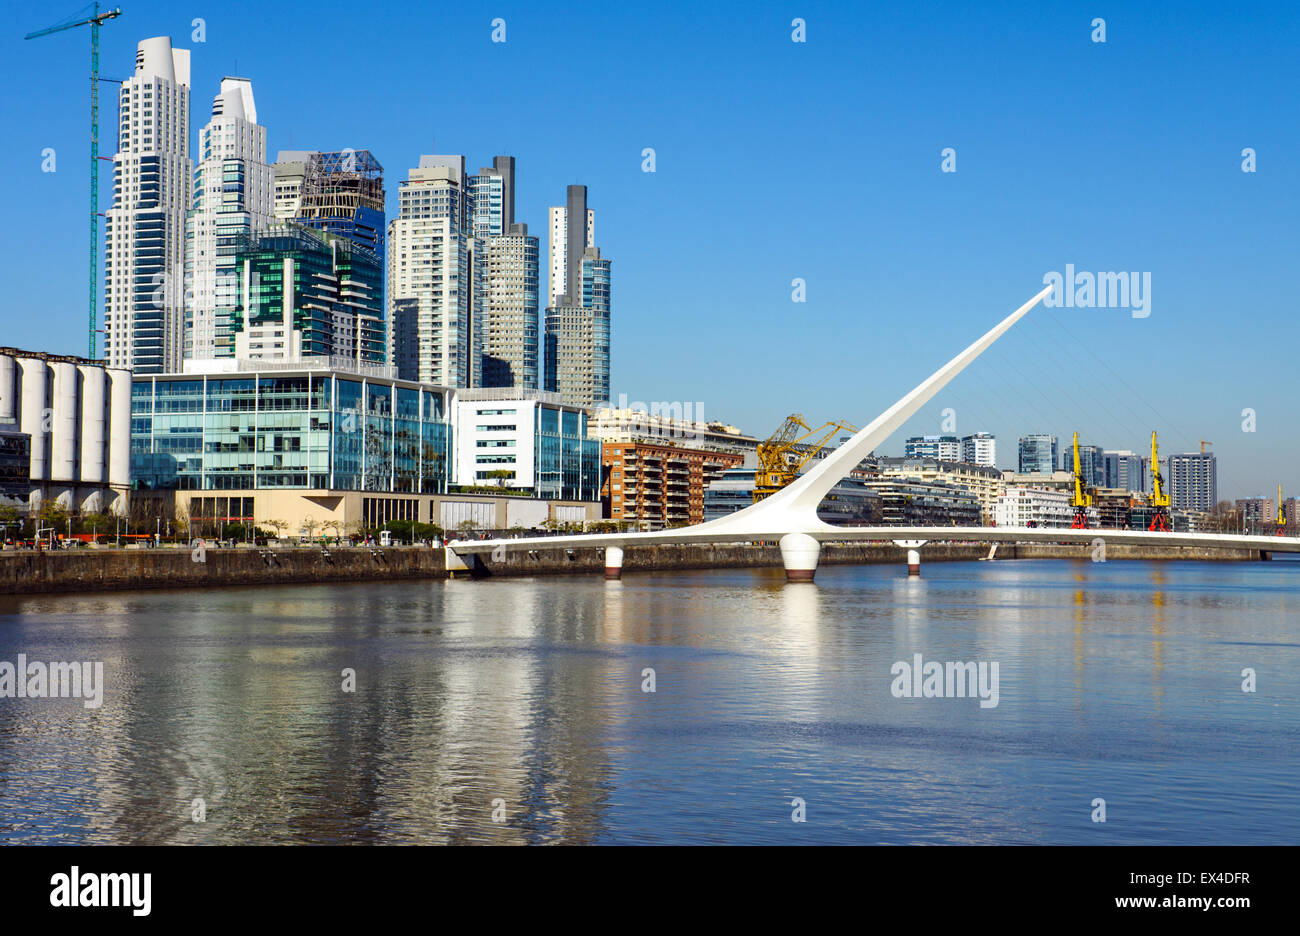 The modern Puerto Madero district in Buenos Aires, Argentina Stock Photo